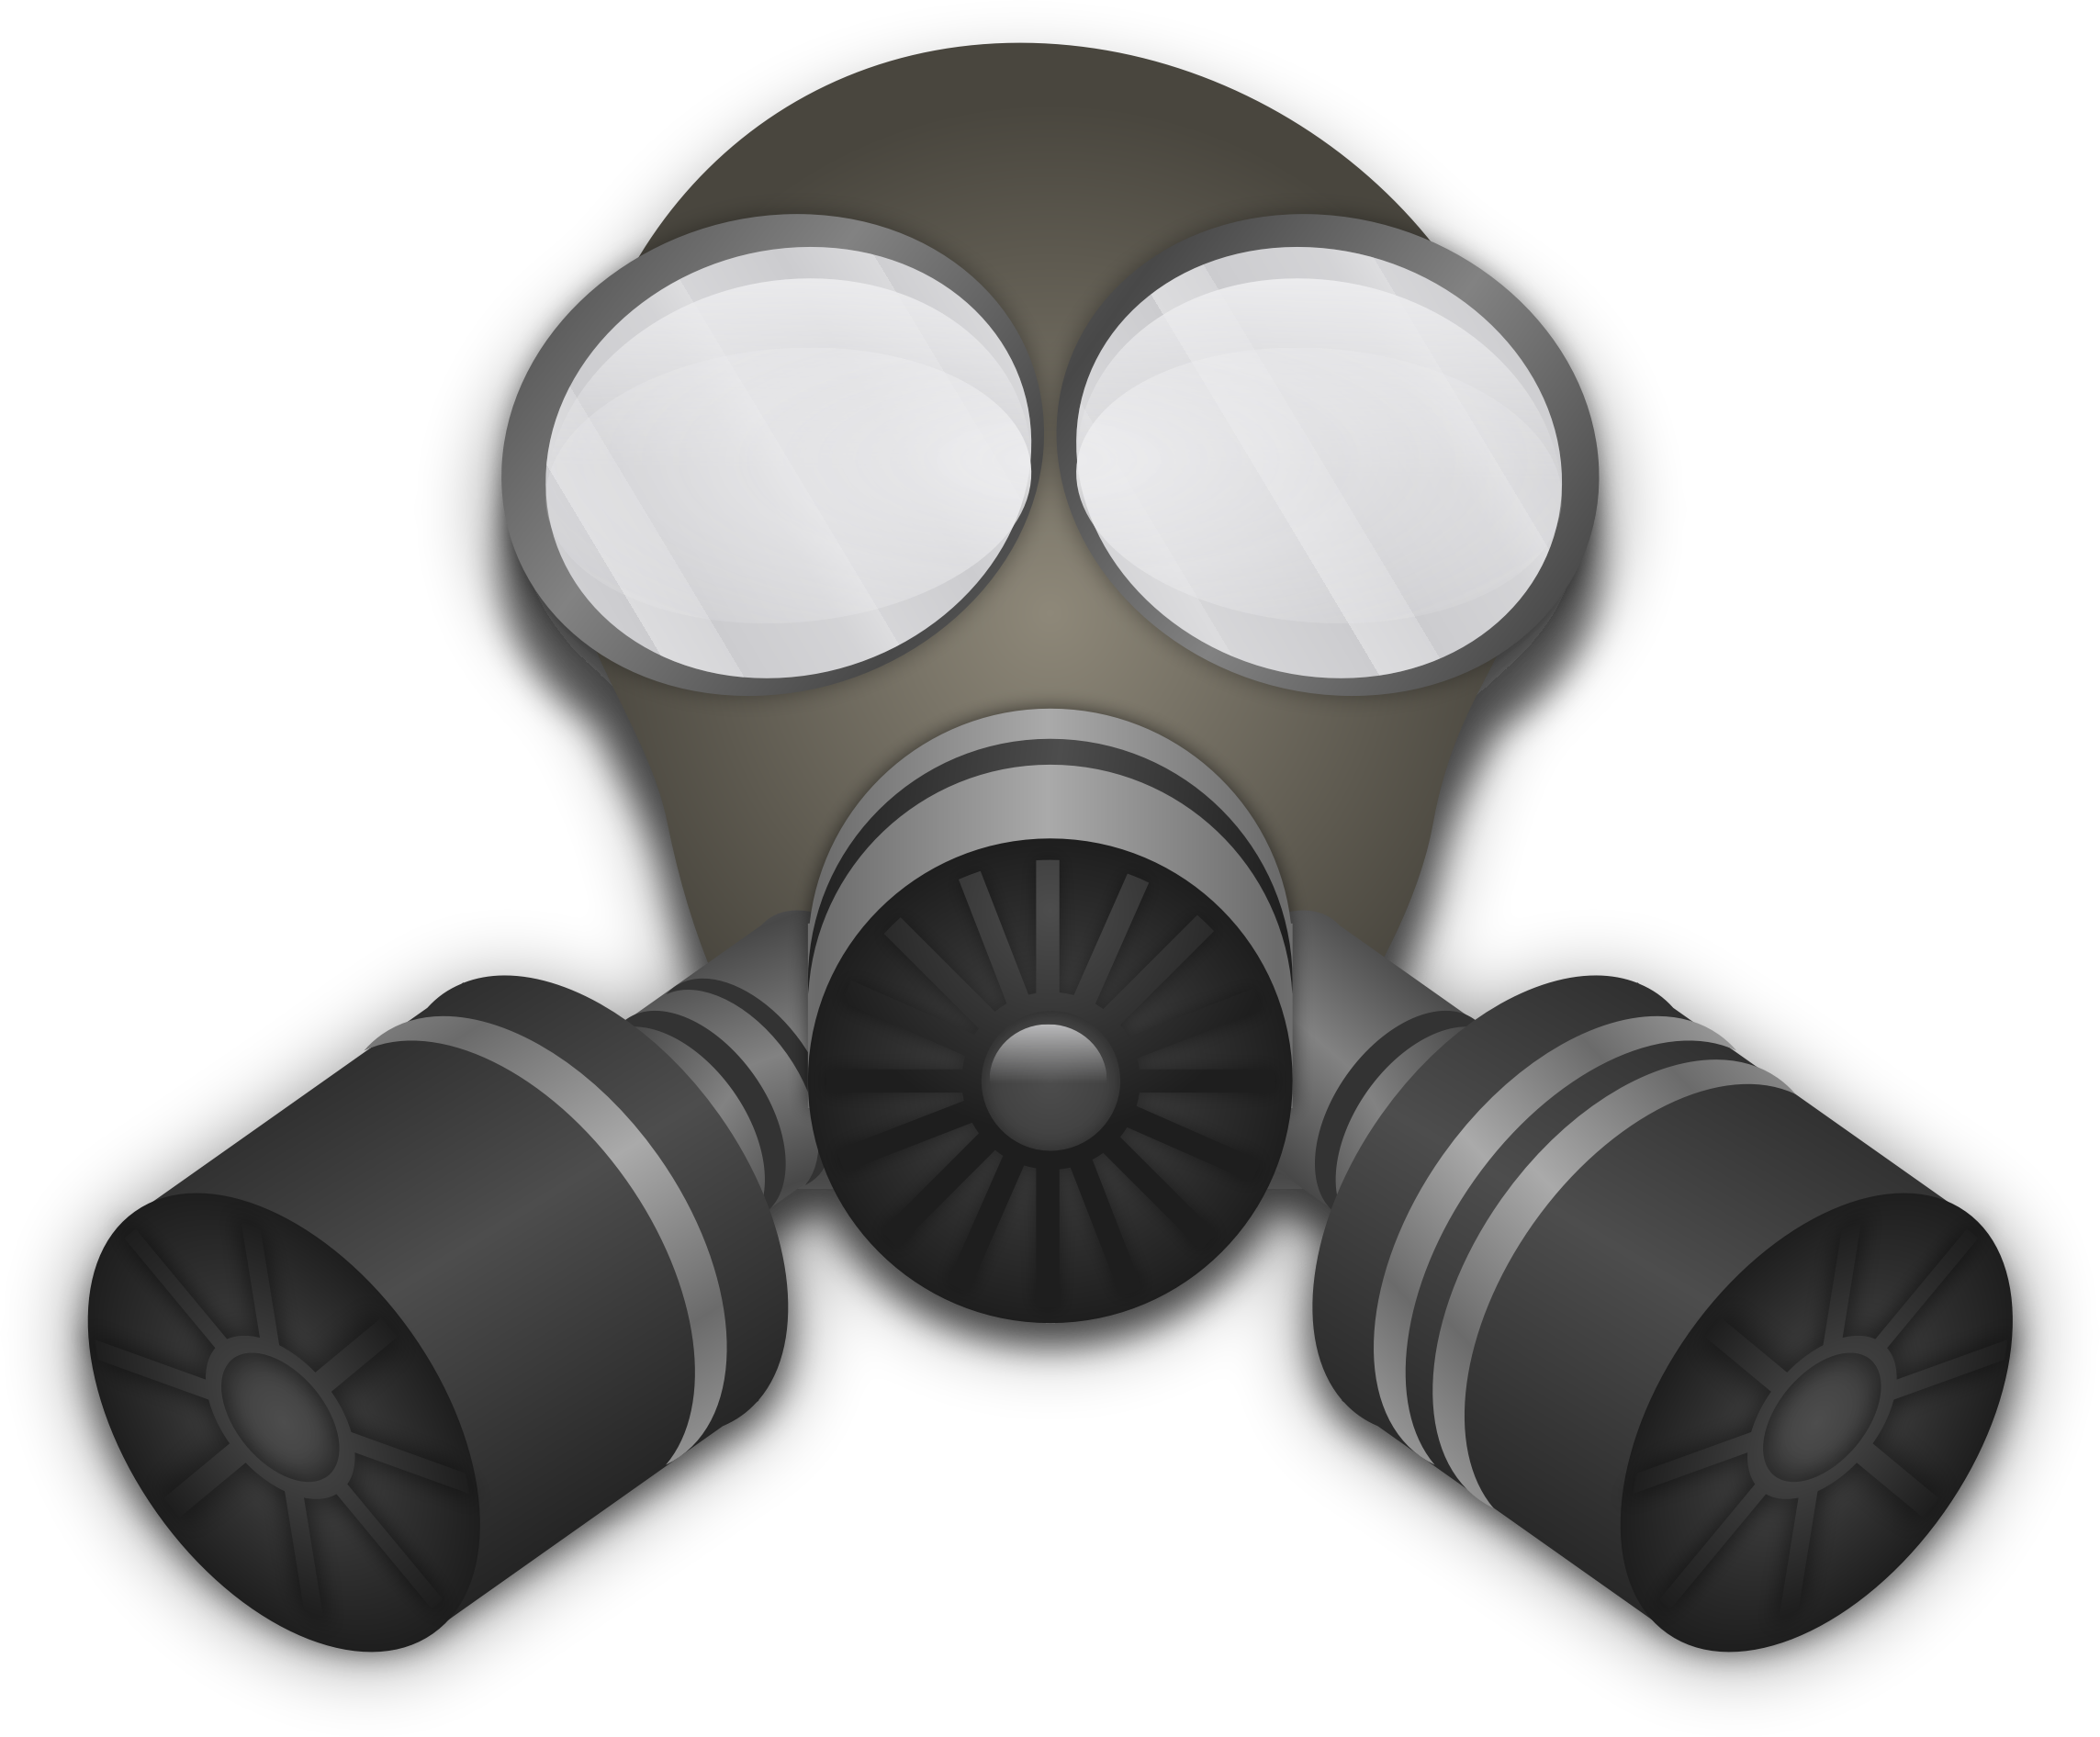 Transparent Gas Download Free Transparent Gas Mask png images, Free ClipArts on Clipart Library